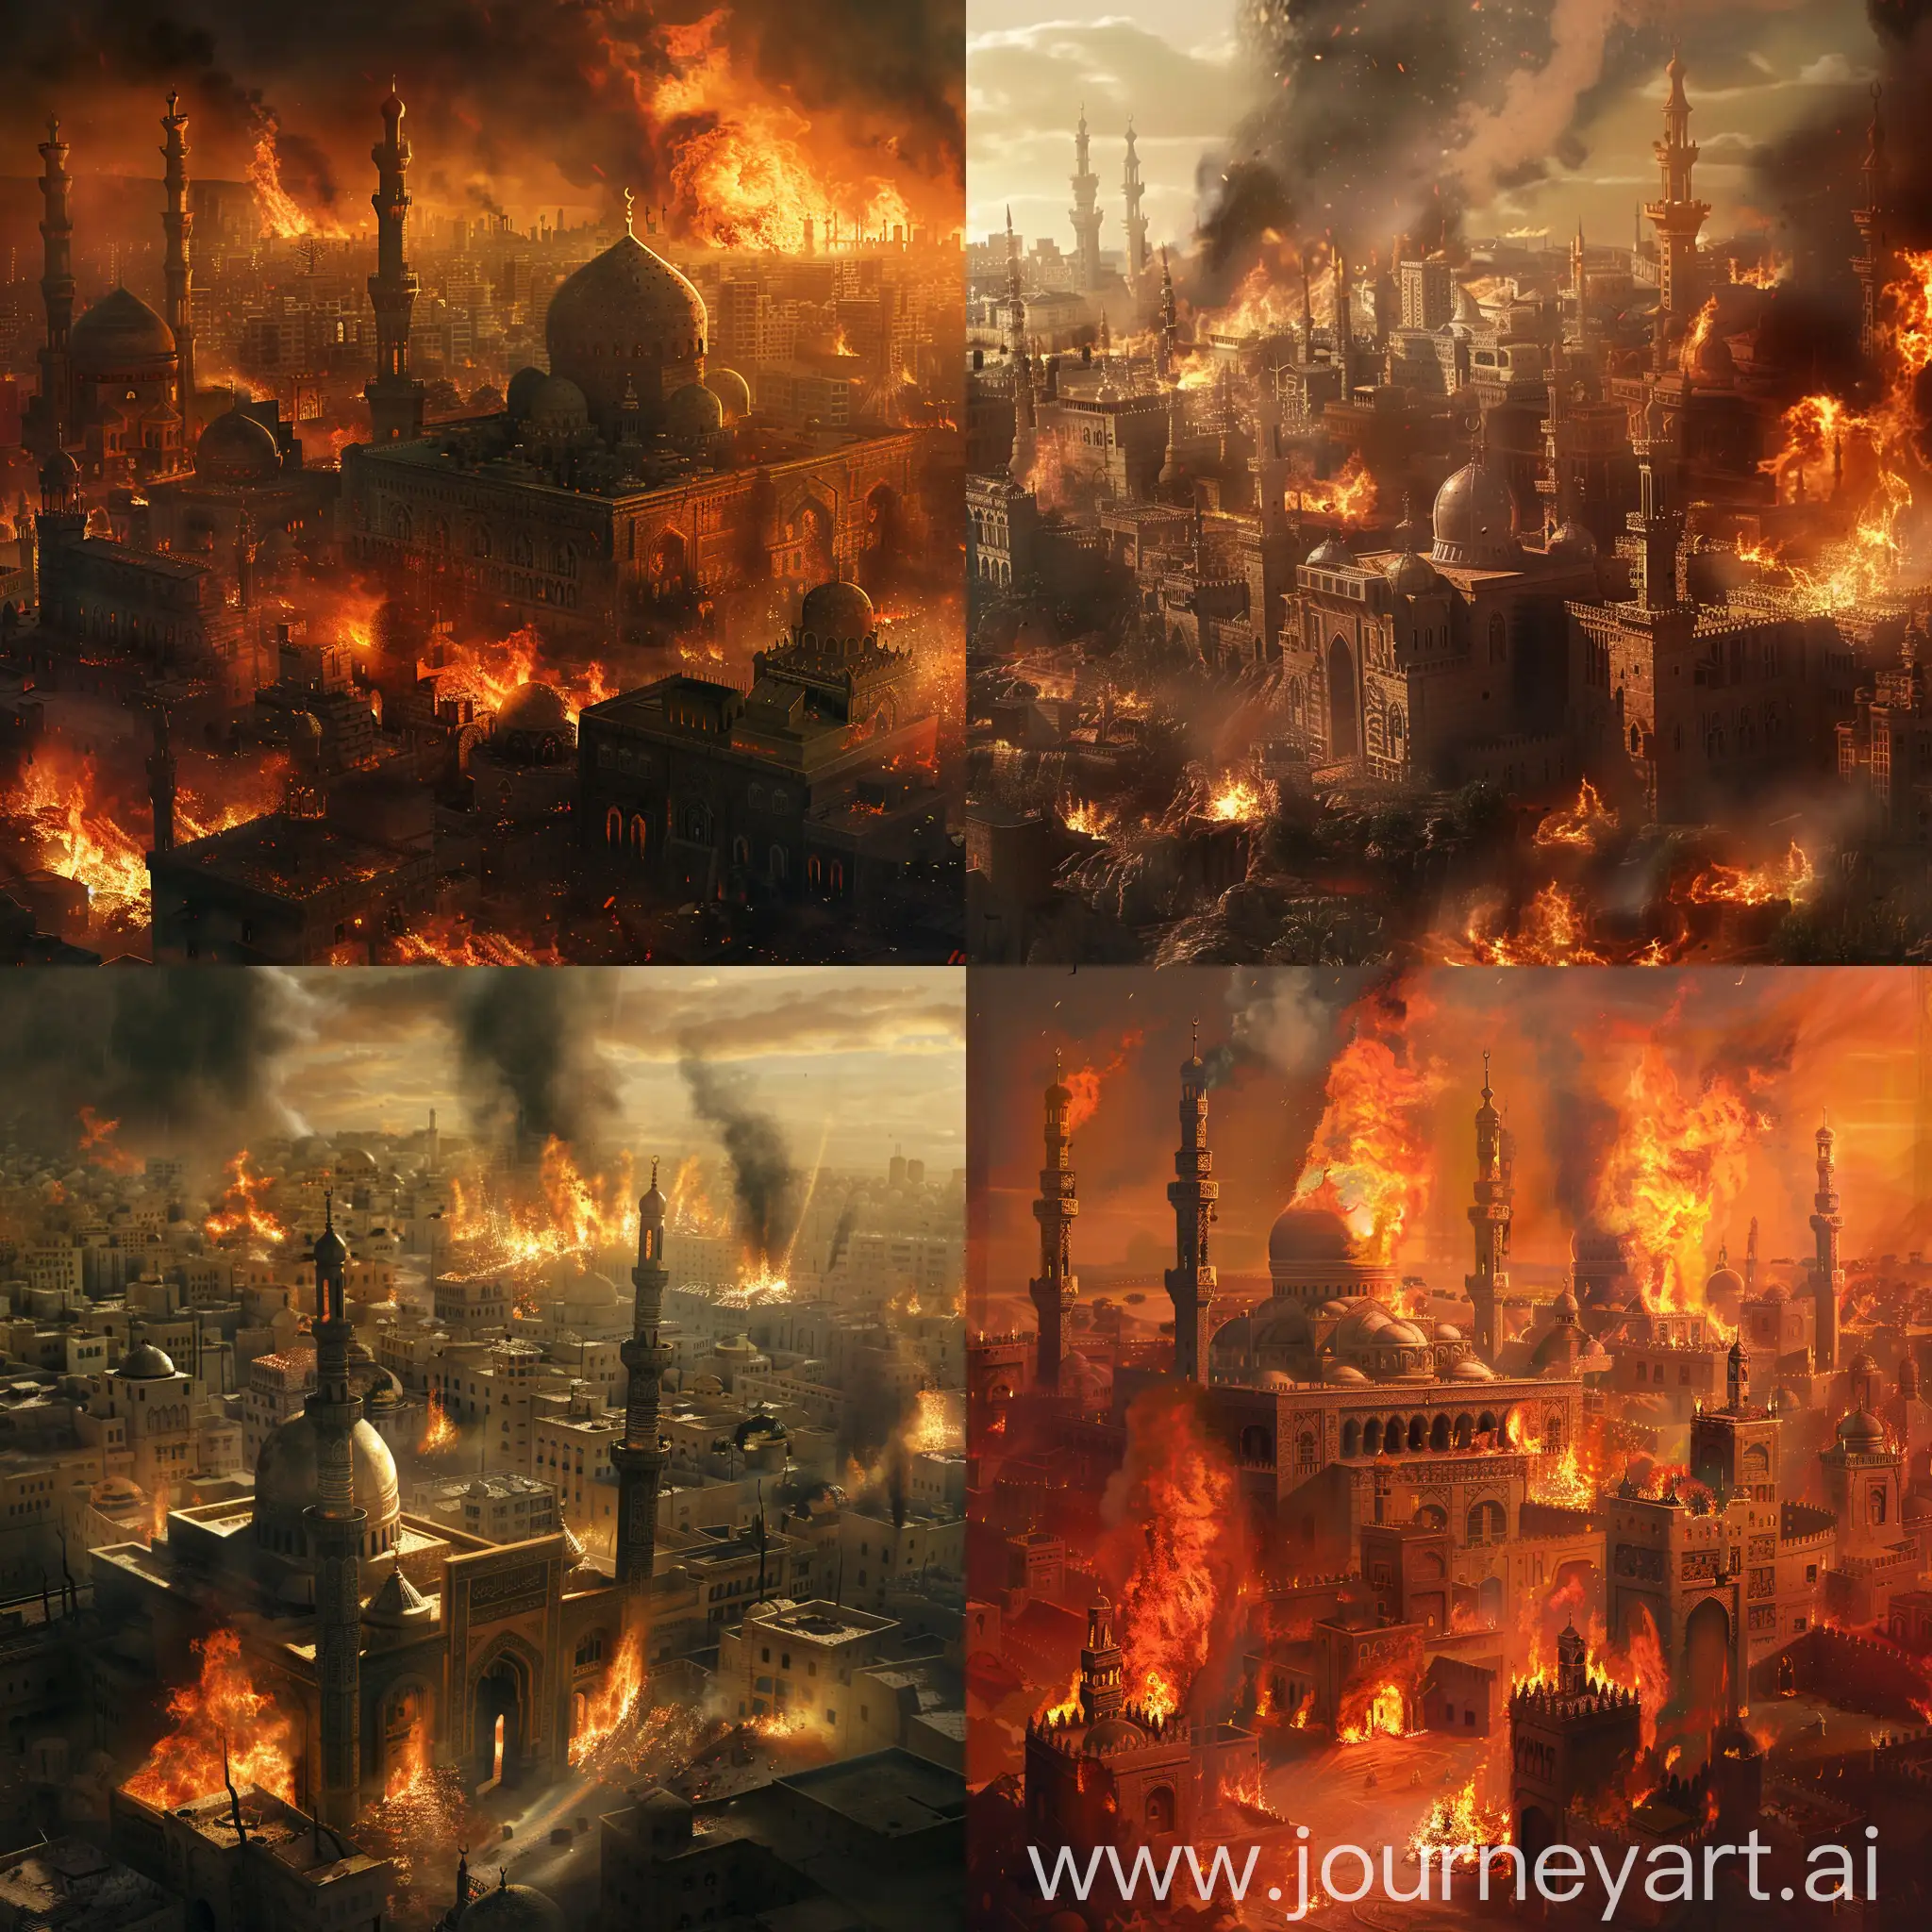 Apocalyptic-Scene-Dajjal-Emerges-in-a-Burning-Middle-Eastern-City